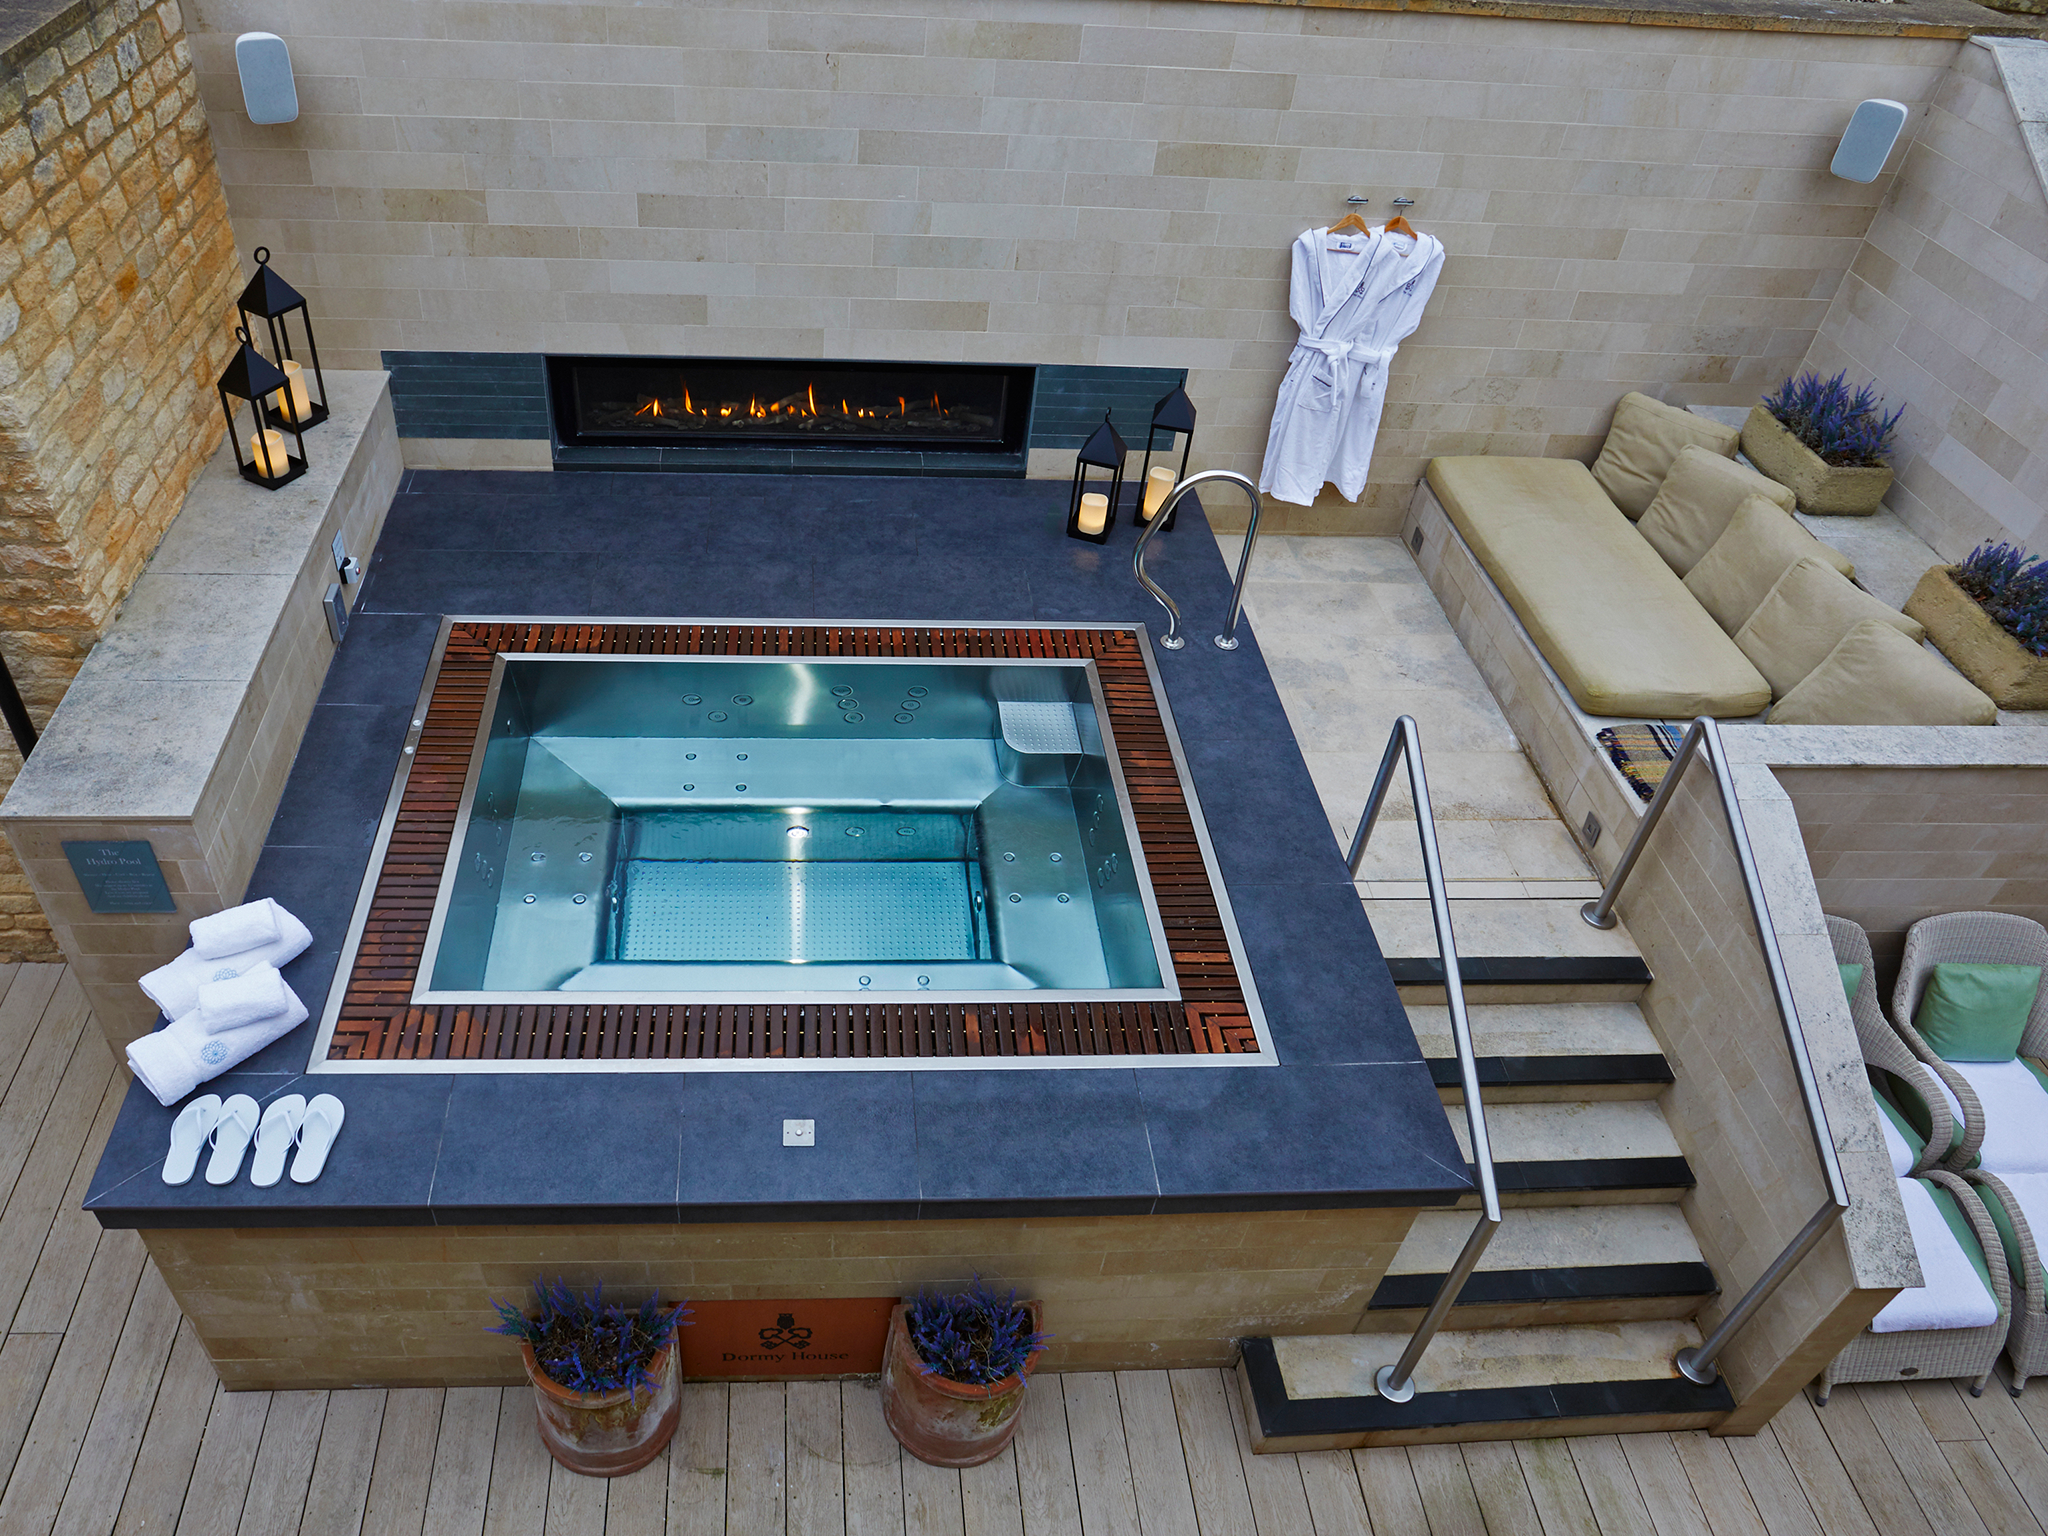 The boutique hotel has a candlelit indoor infinity pool and hydrotherapy hot tub